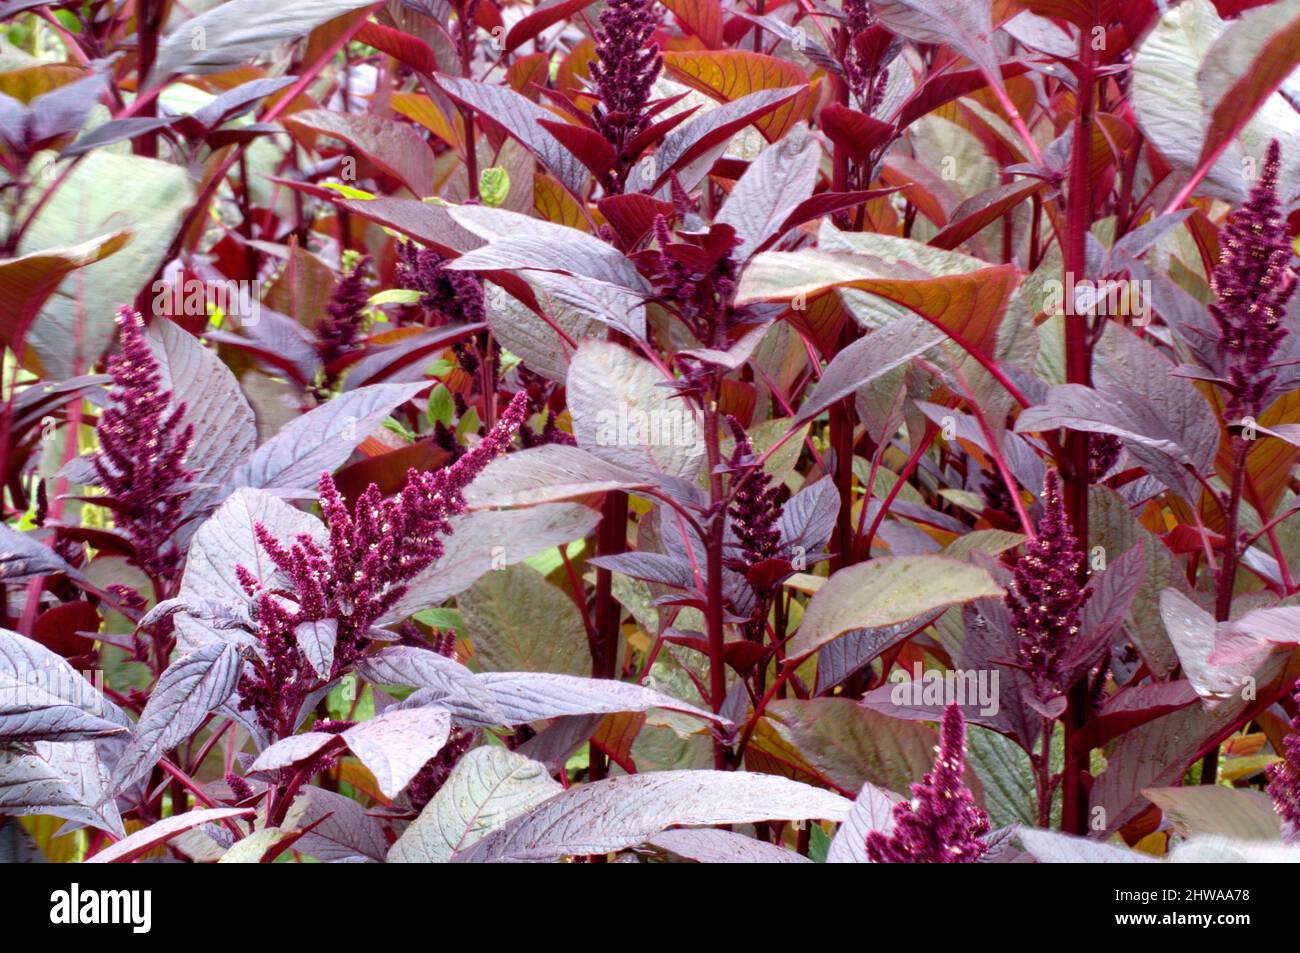 Prince-of-Wales feather, prince's-feather (Amaranthus hypochondriacus), blooming Stock Photo